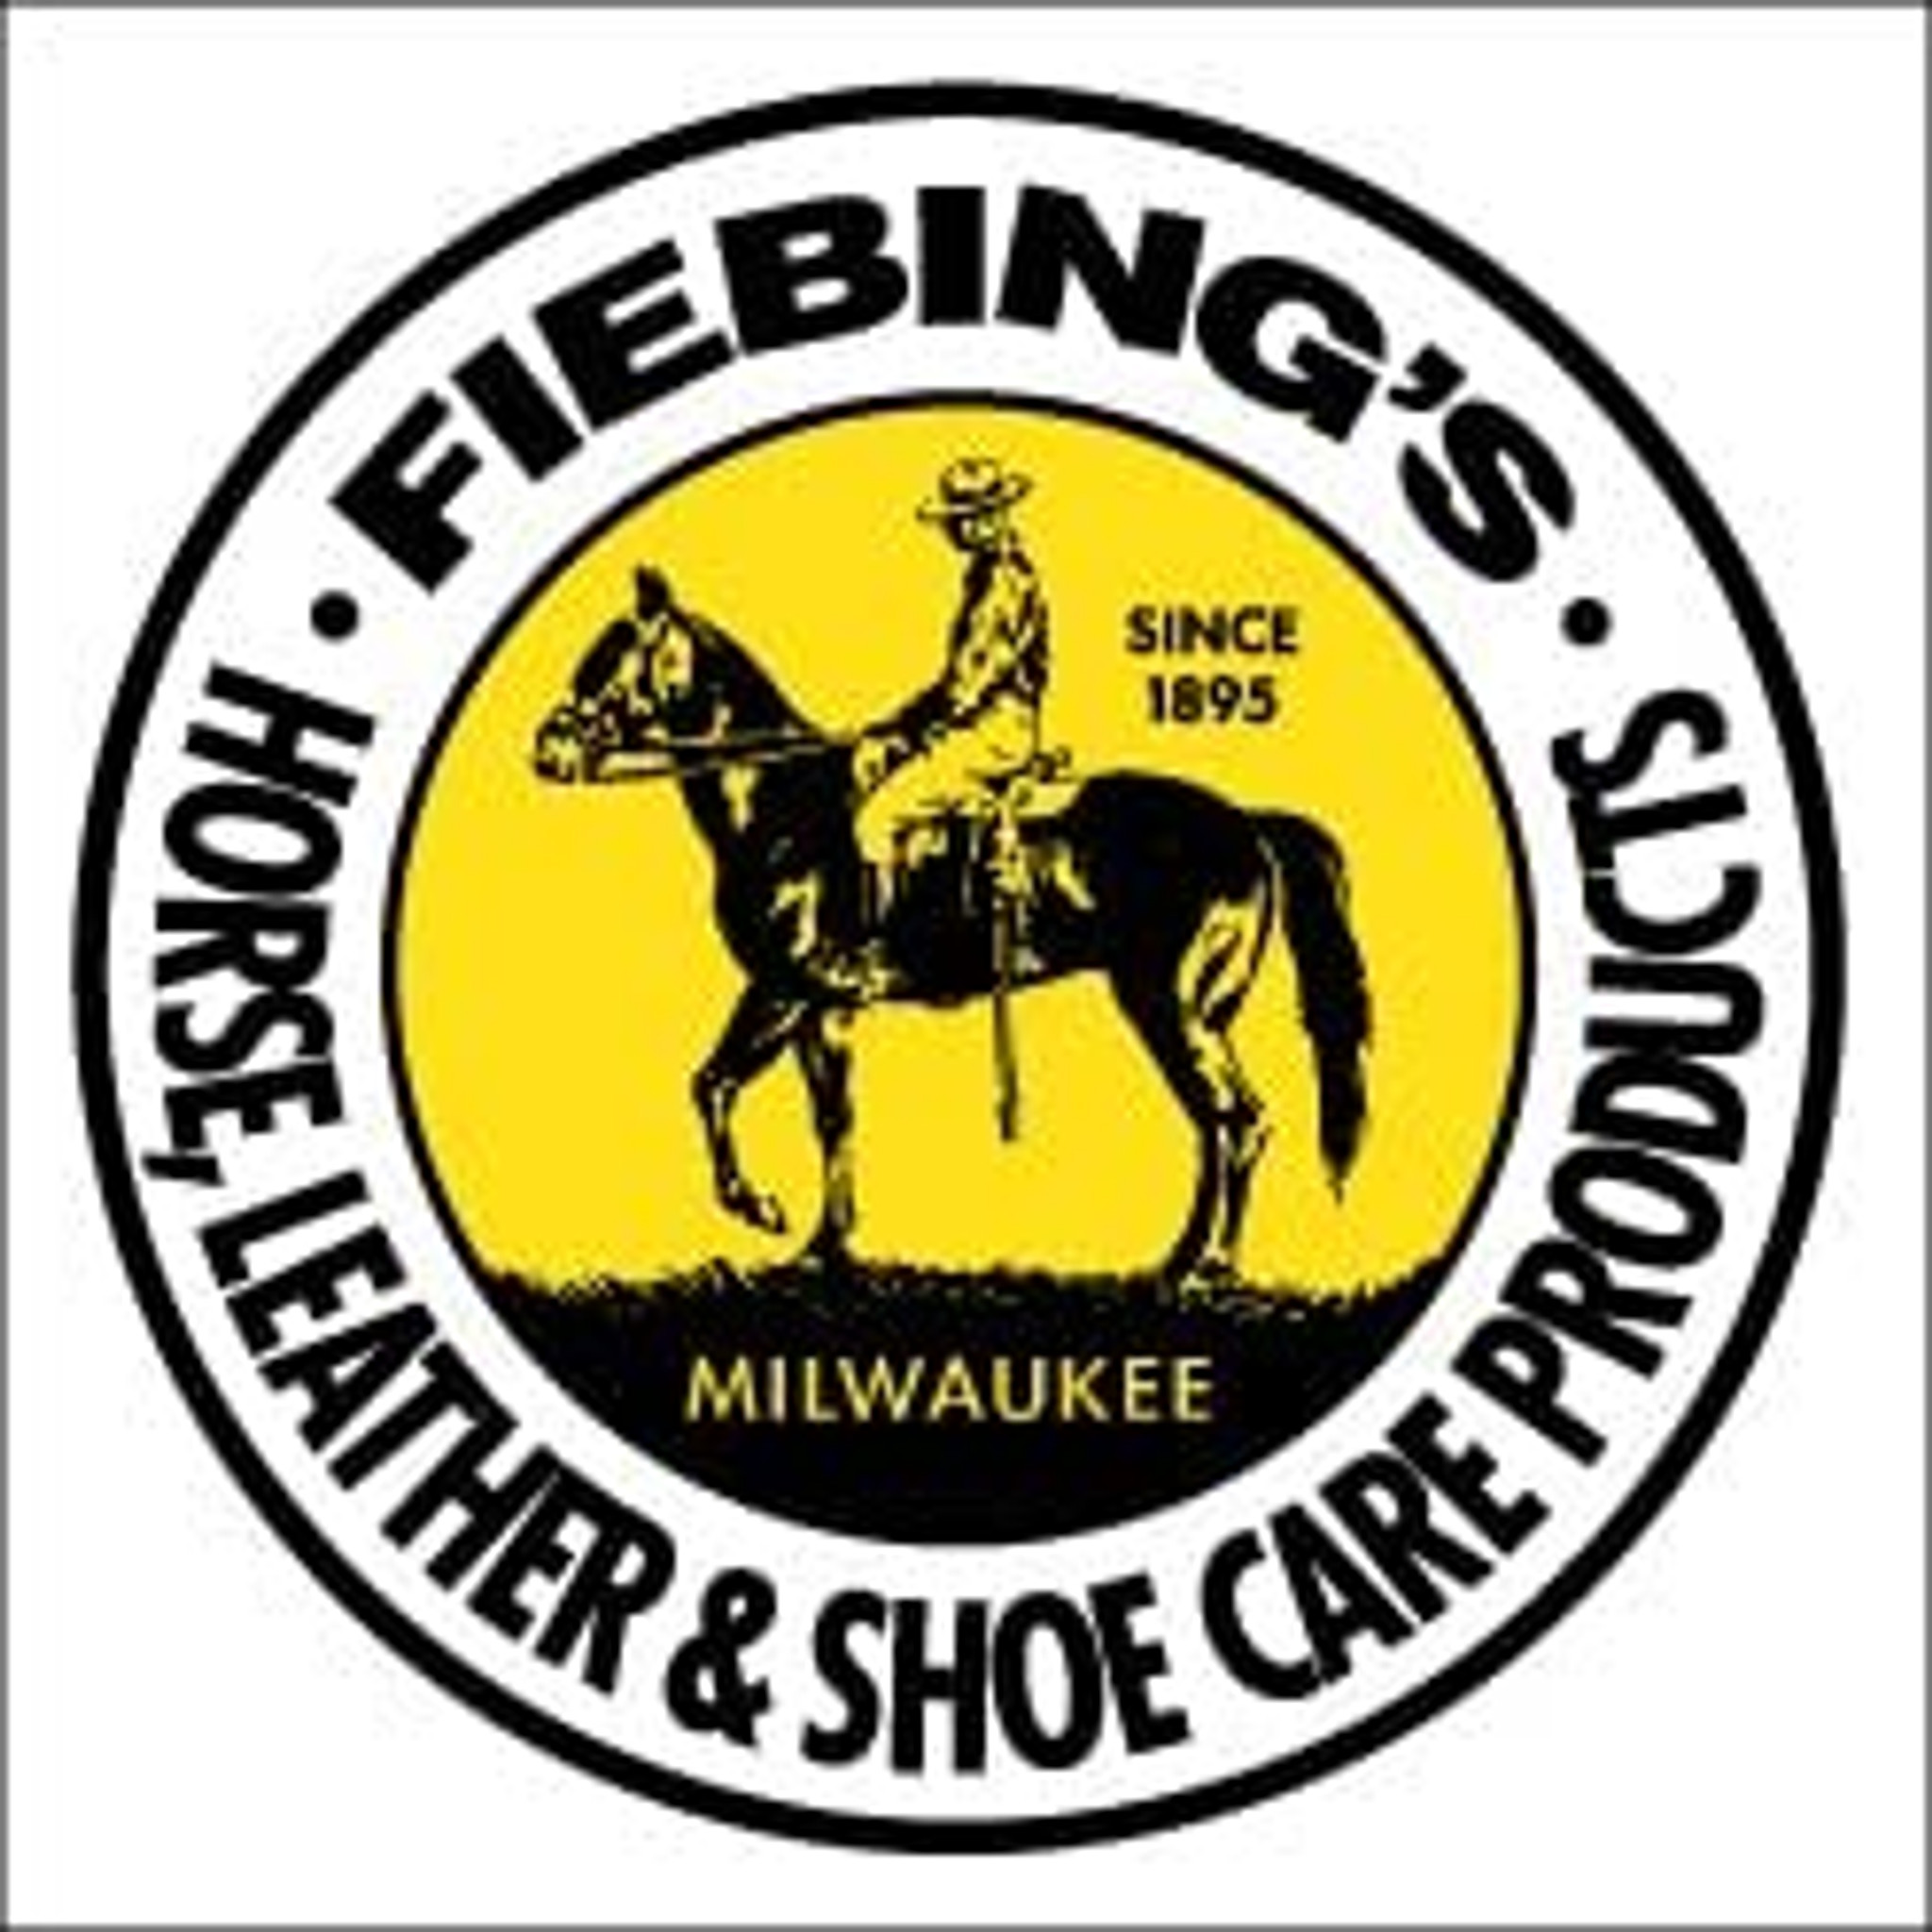 Fiebing's Saddle Soap White 12 oz Polish and Clean Leather Revives